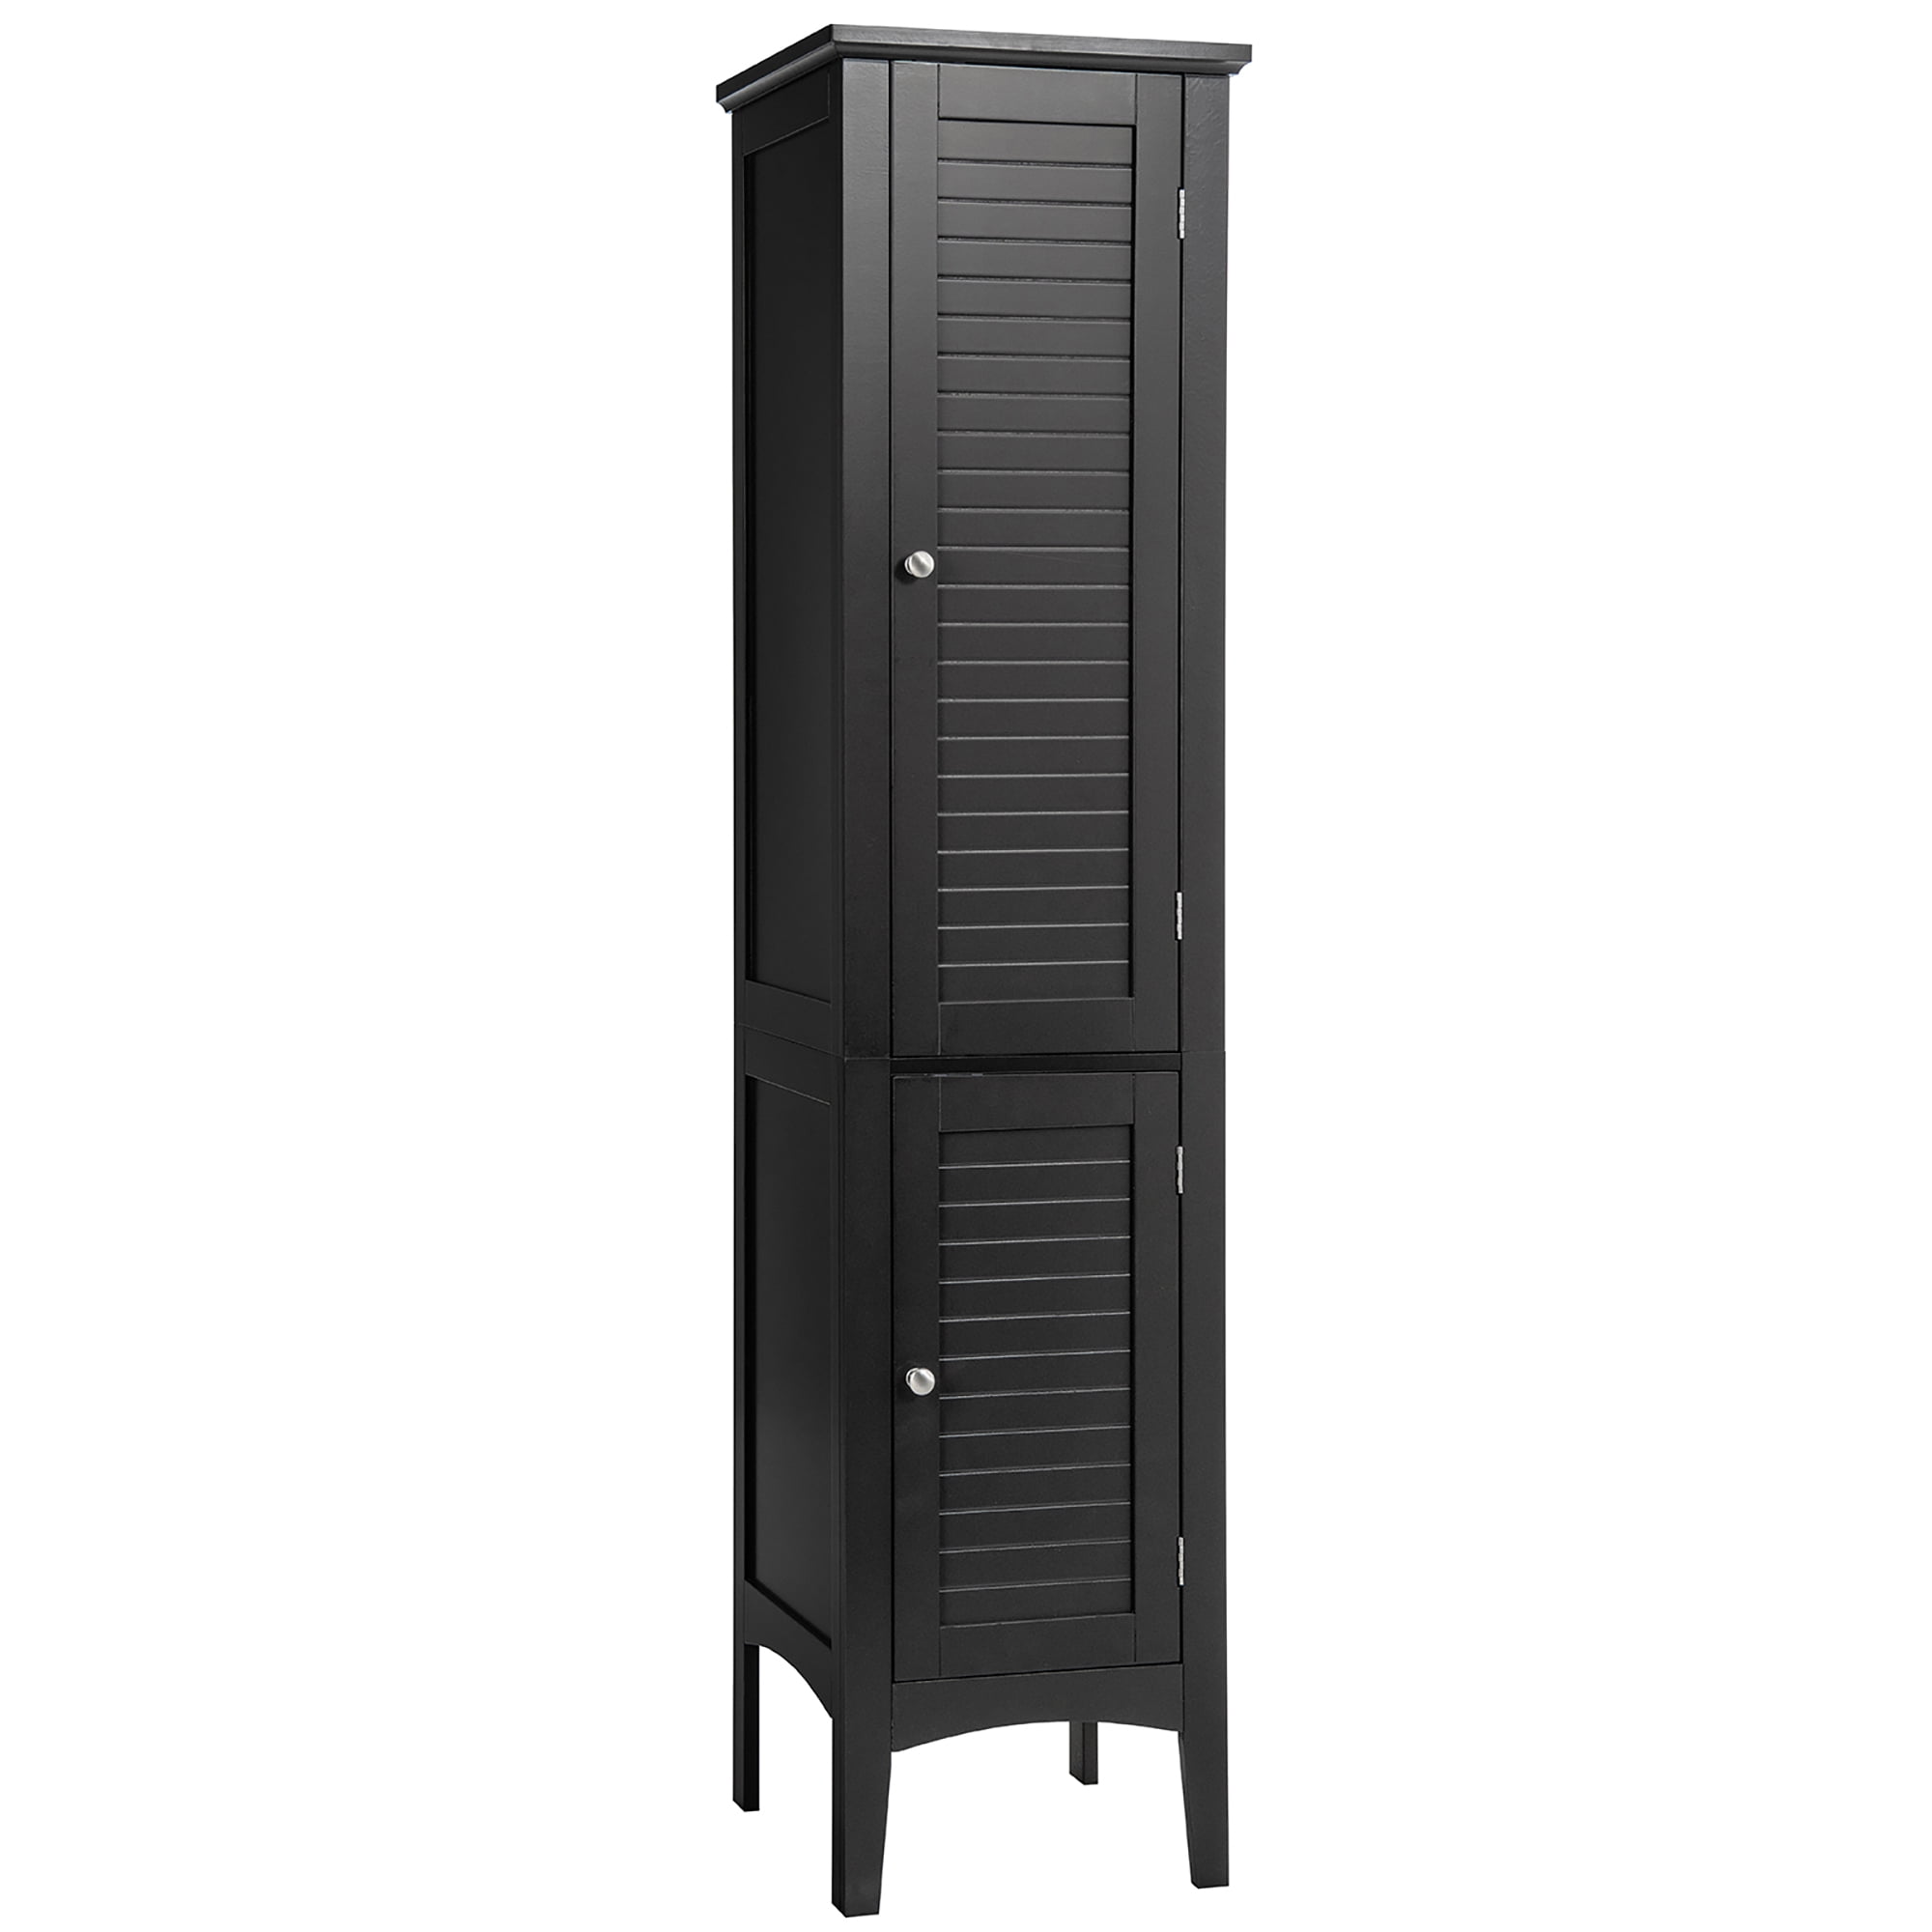 Runesay 24.72 in. W x 17.5 in. D x 31.5 in. H Black Brown Linen Cabinet Bathroom  Corner Storage Cabinet with Adjustable Shelf KY-WXNLHHM2 - The Home Depot